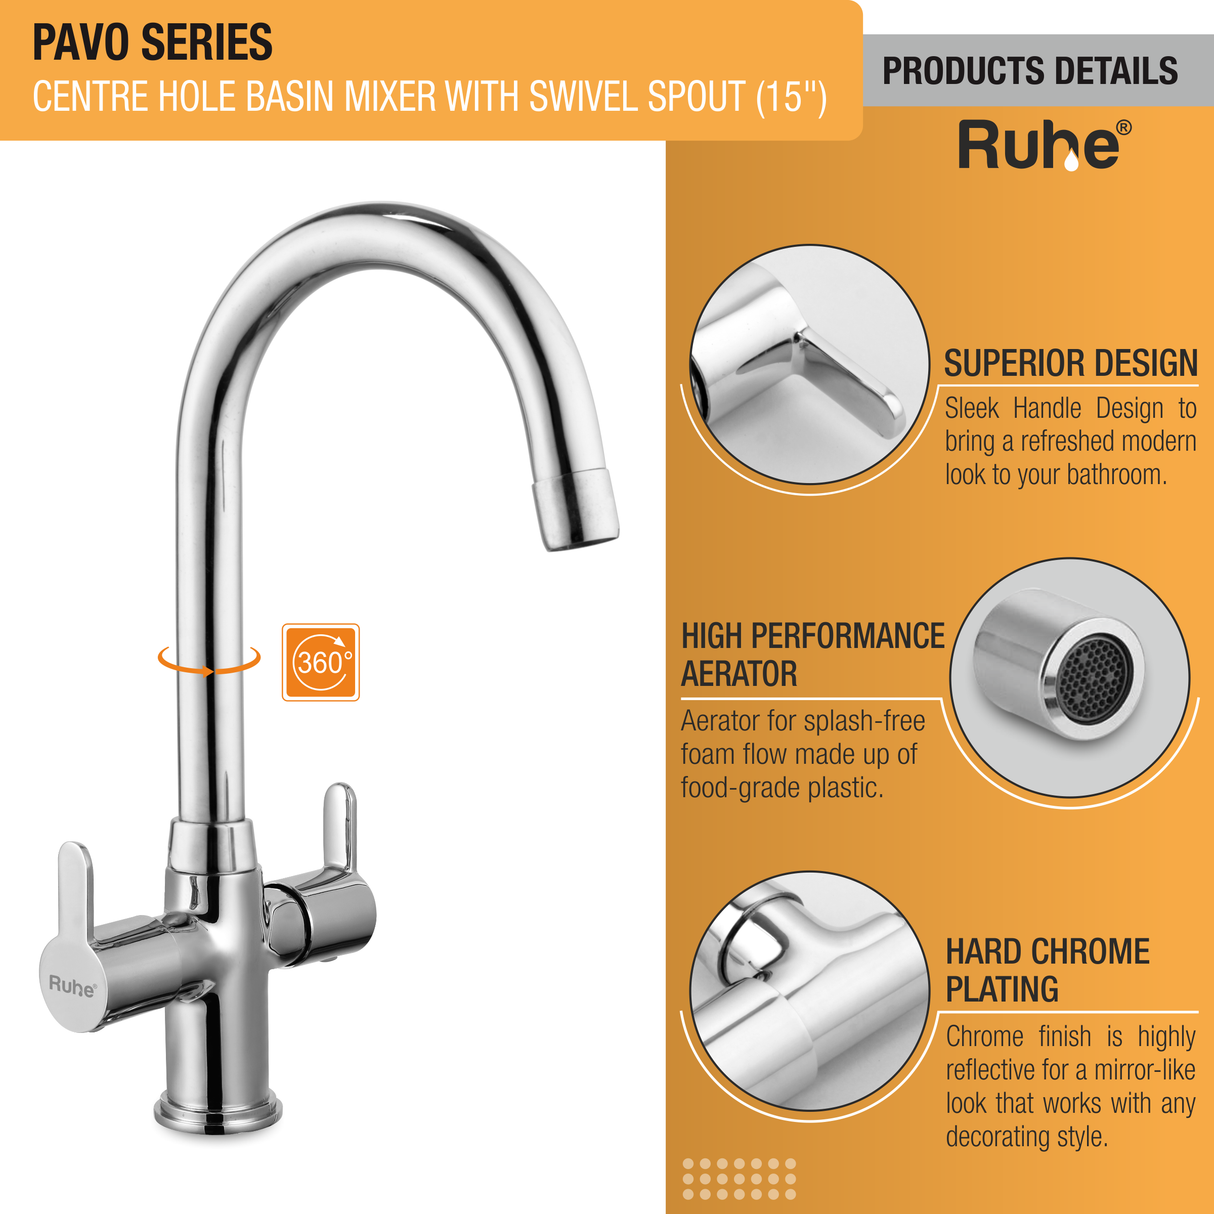 Pavo Centre Hole Basin Mixer with Medium (15 inches) Round Swivel Spout Faucet details